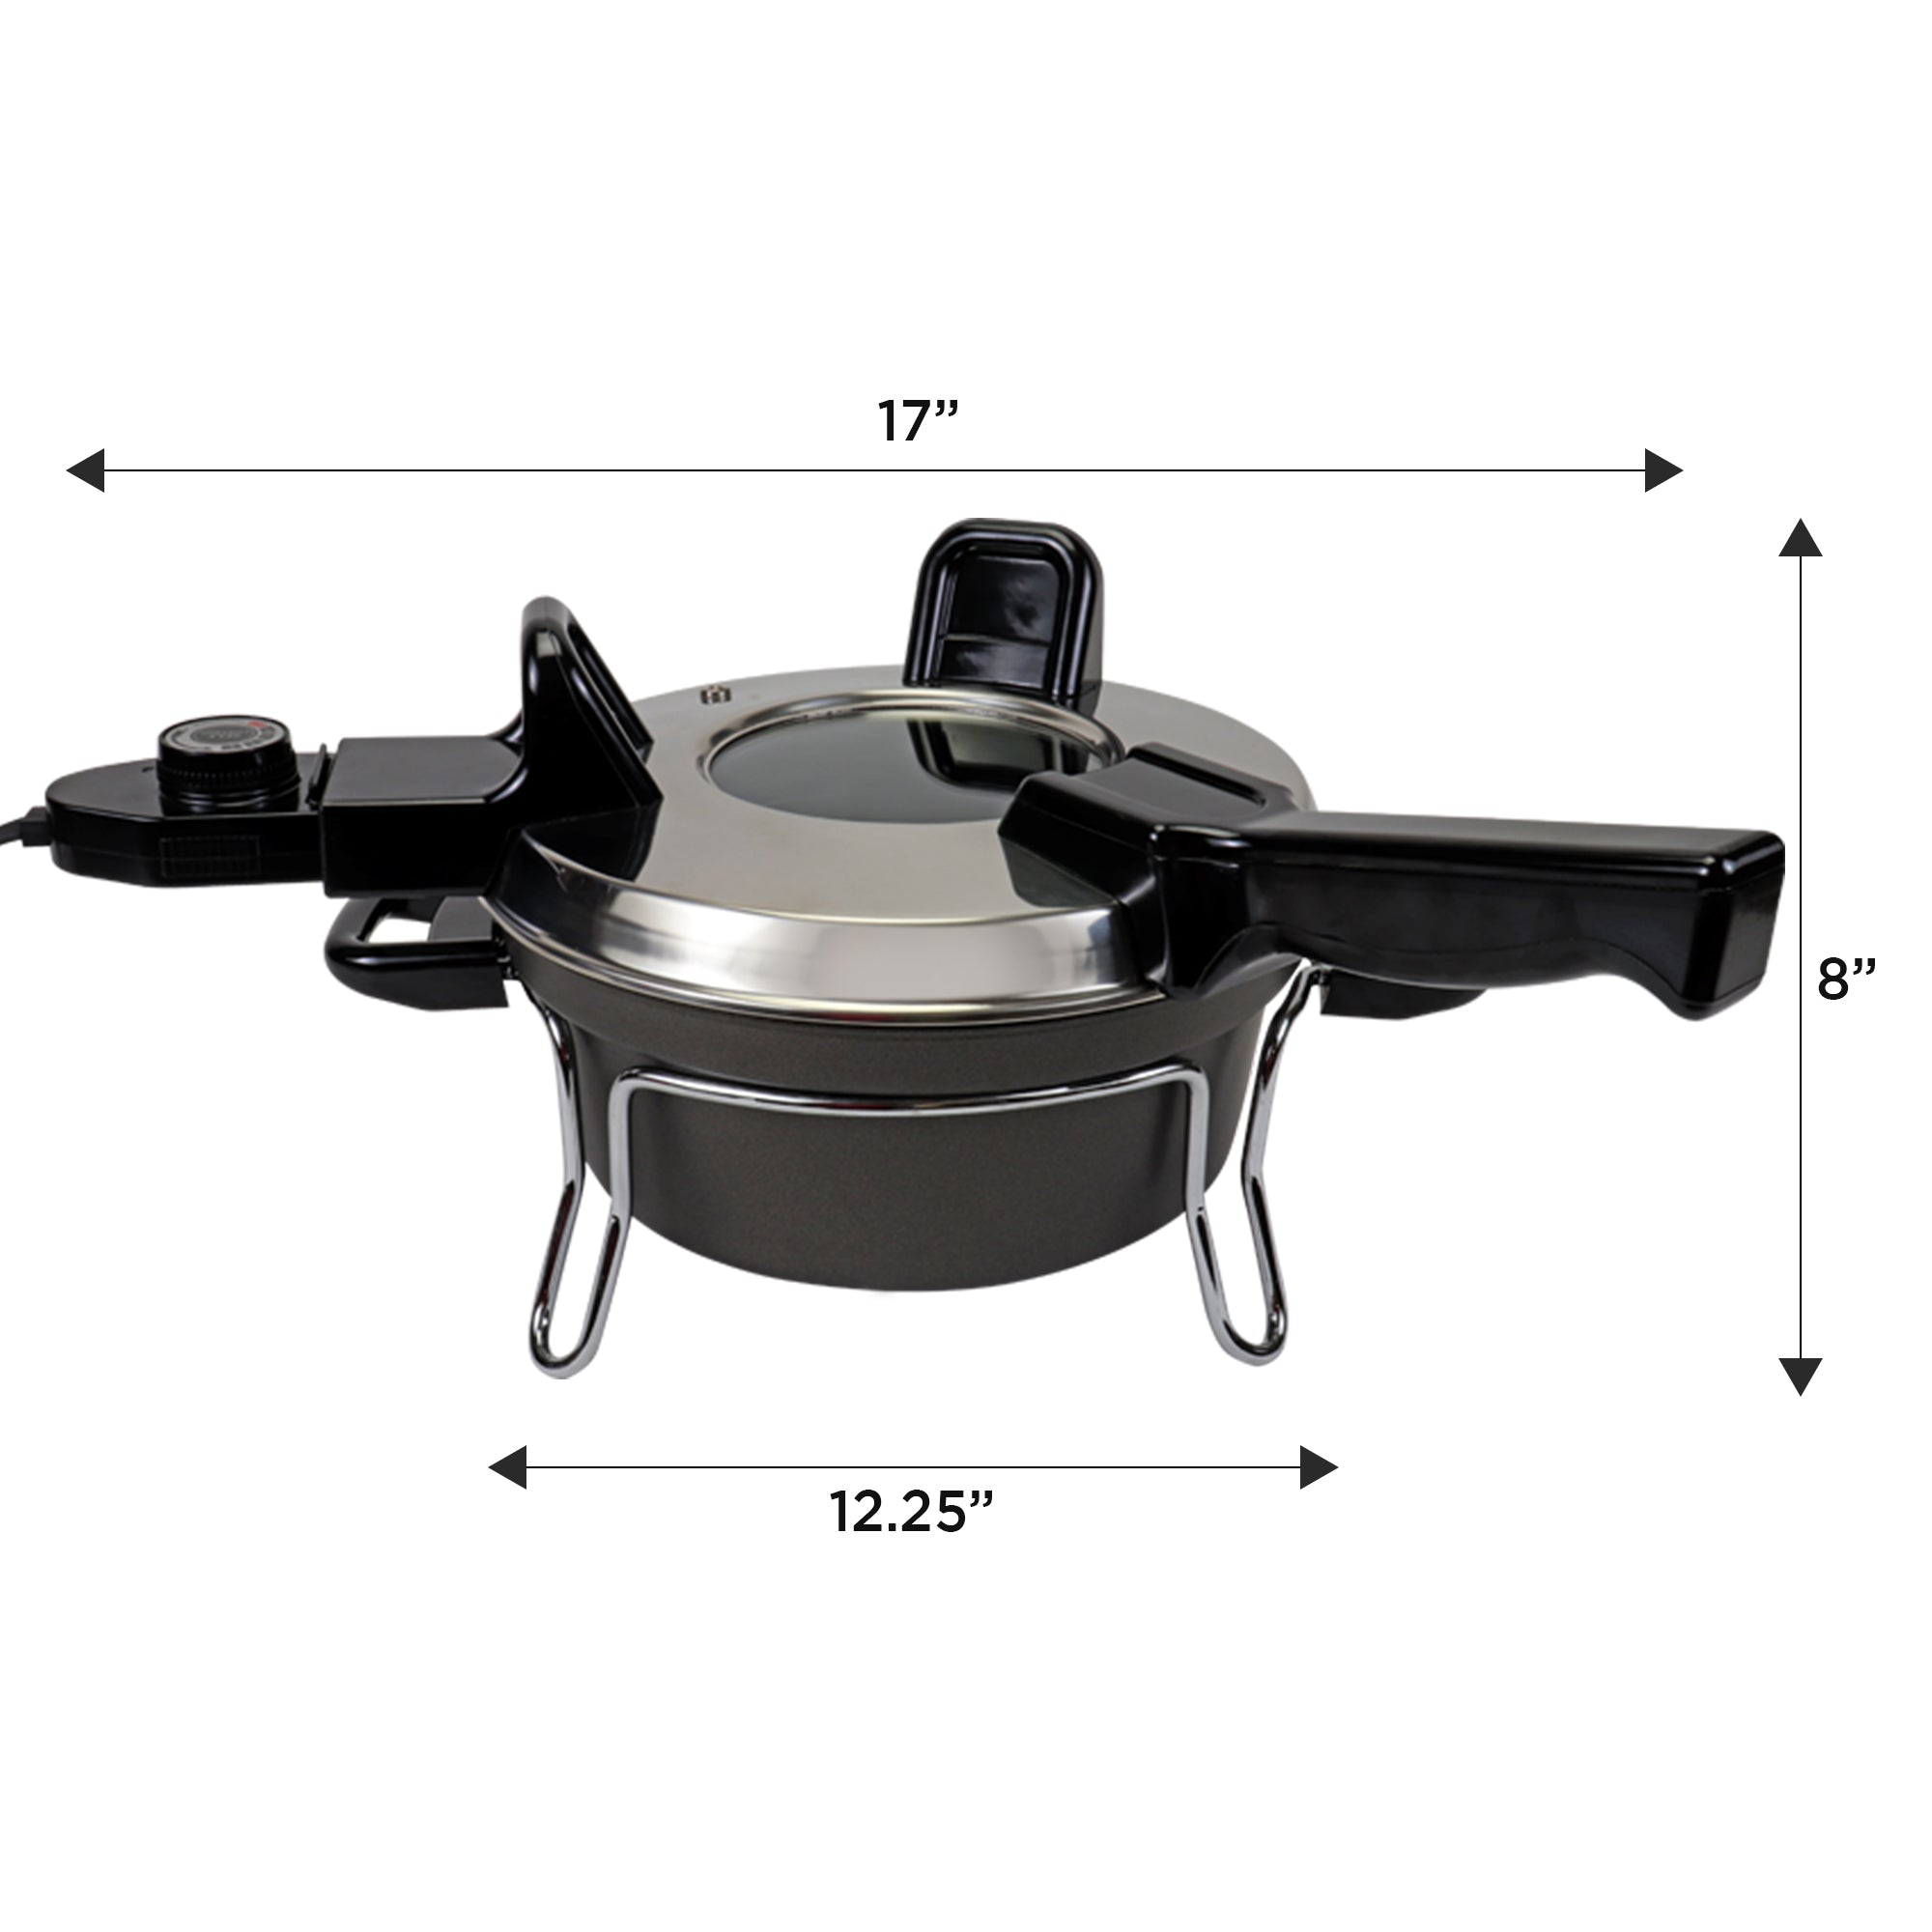 Product shot of Czech cooker on a white background with dimensions labeled